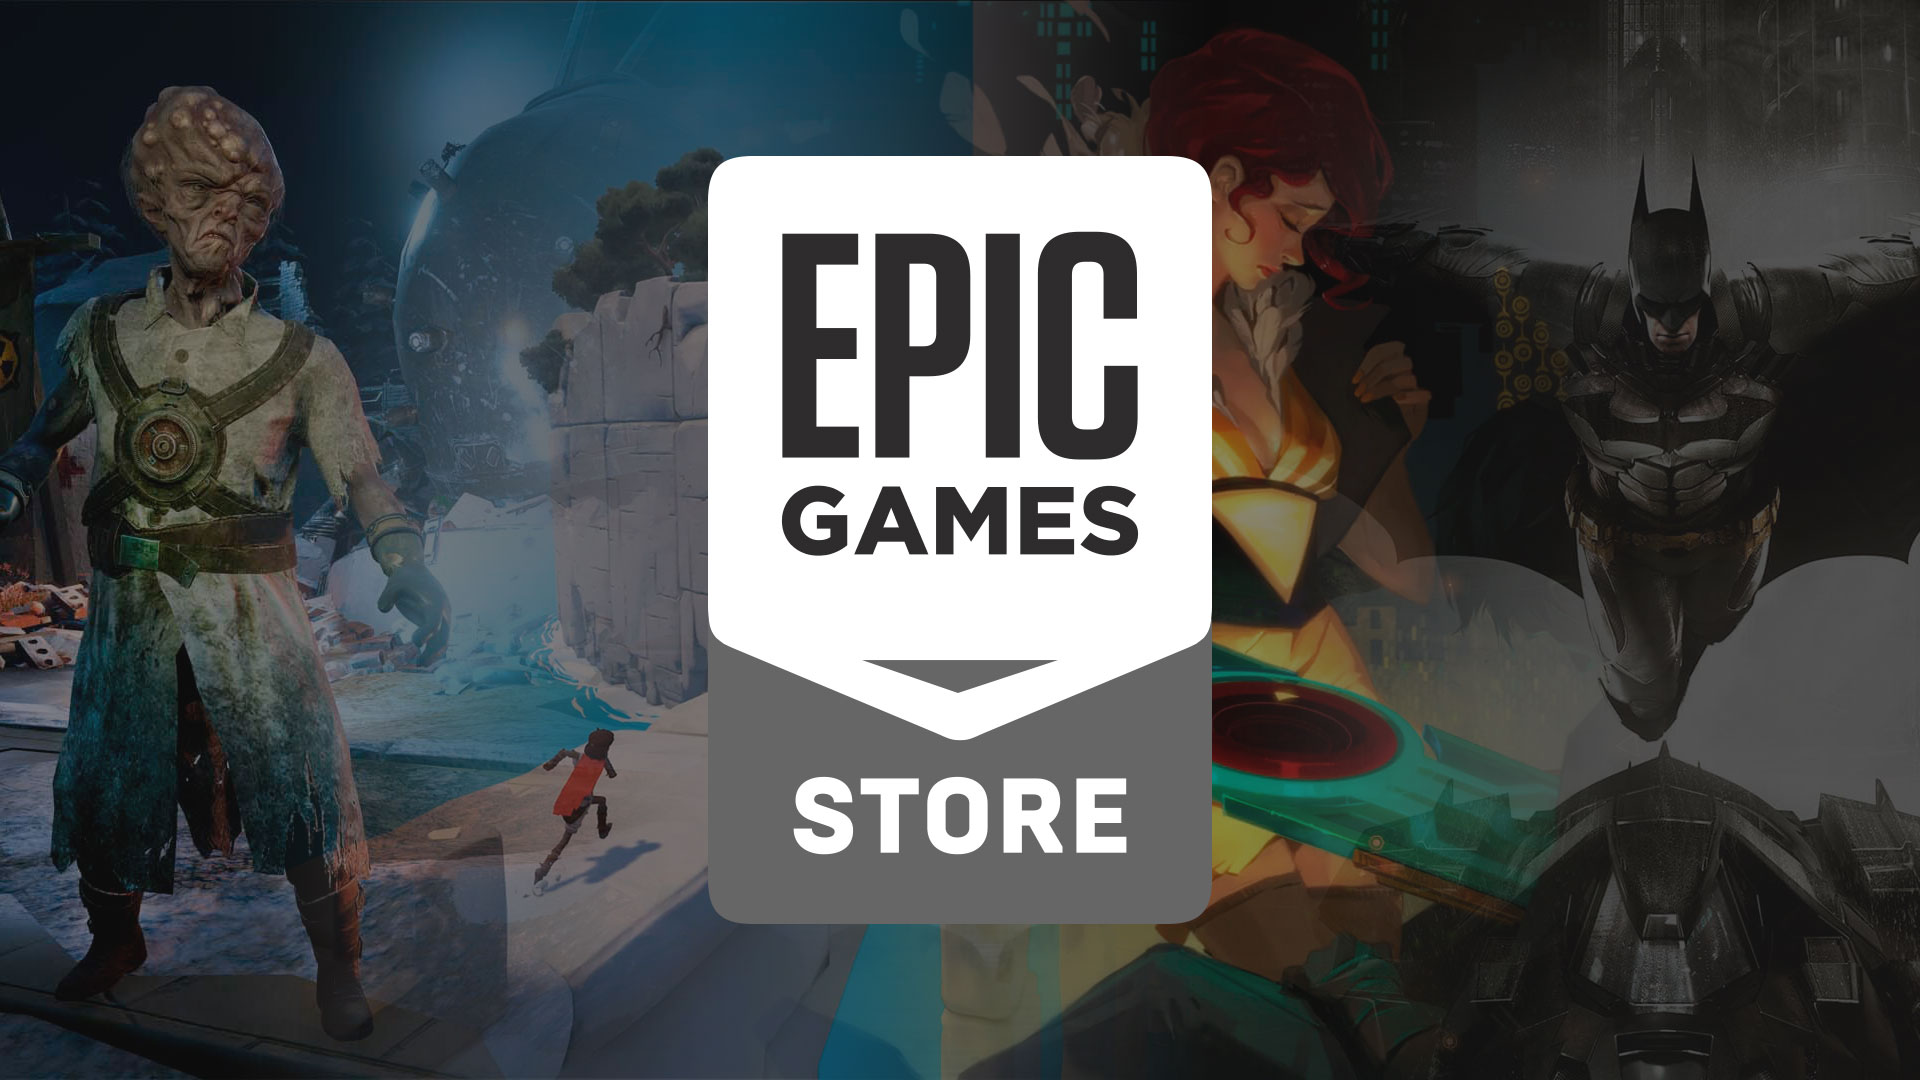 Almost 750 million free games were claimed on the Epic Games Store